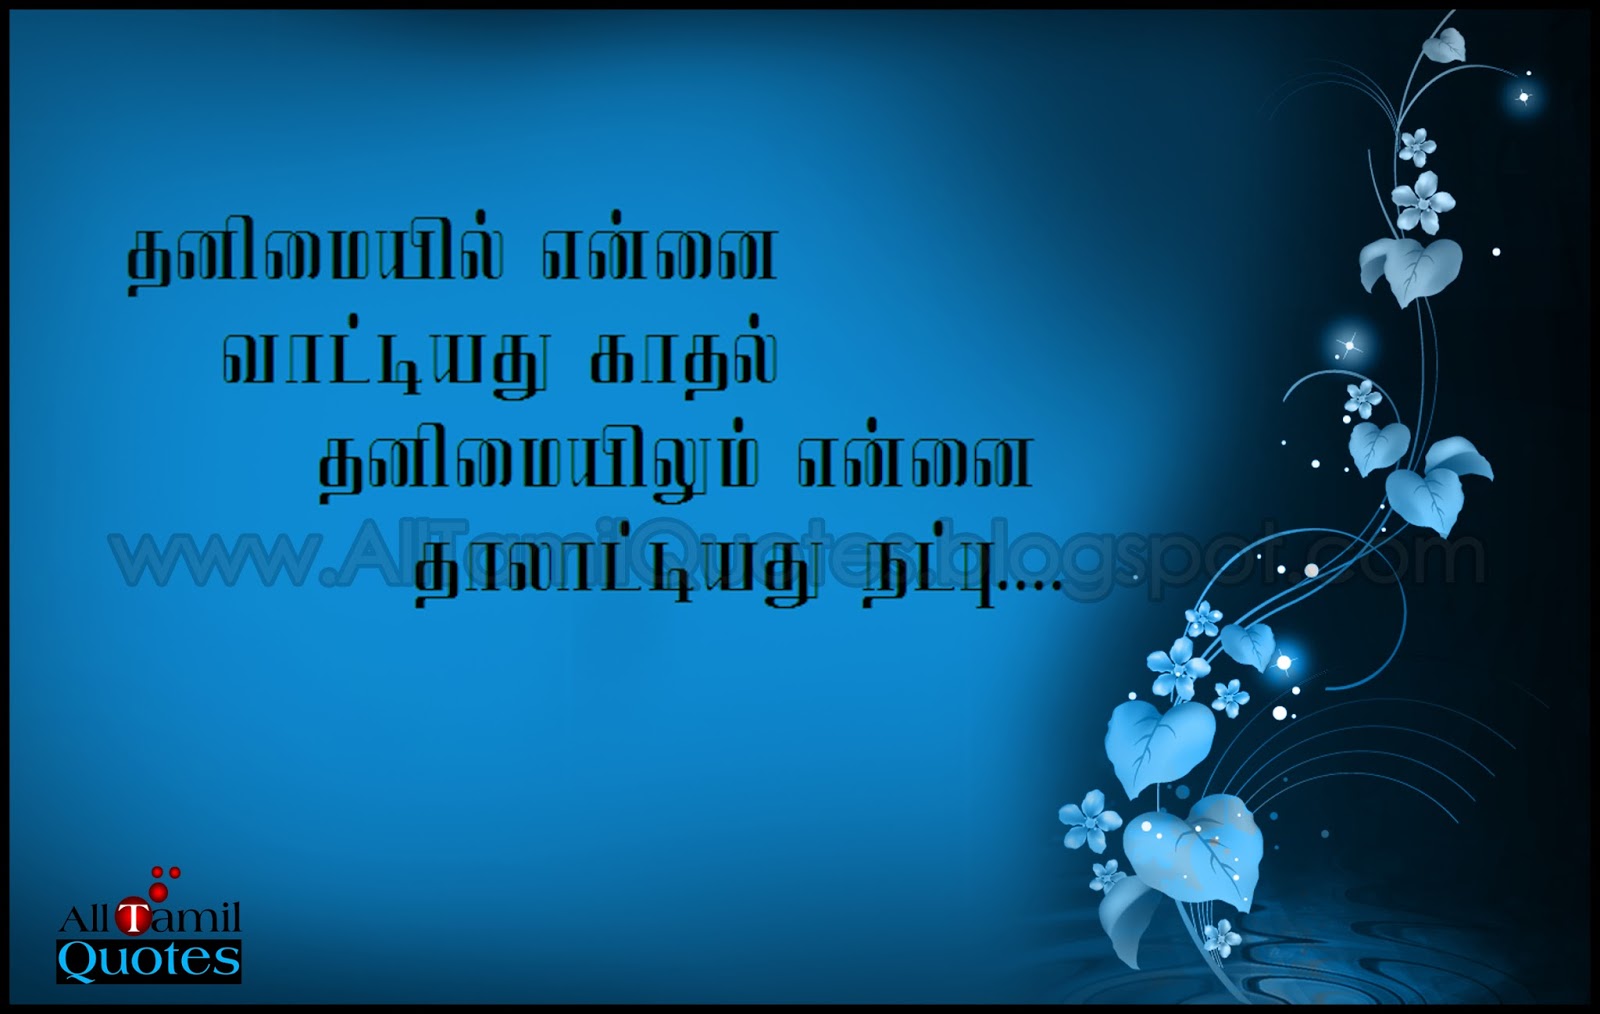 Tamil Quotations and 11 JPG